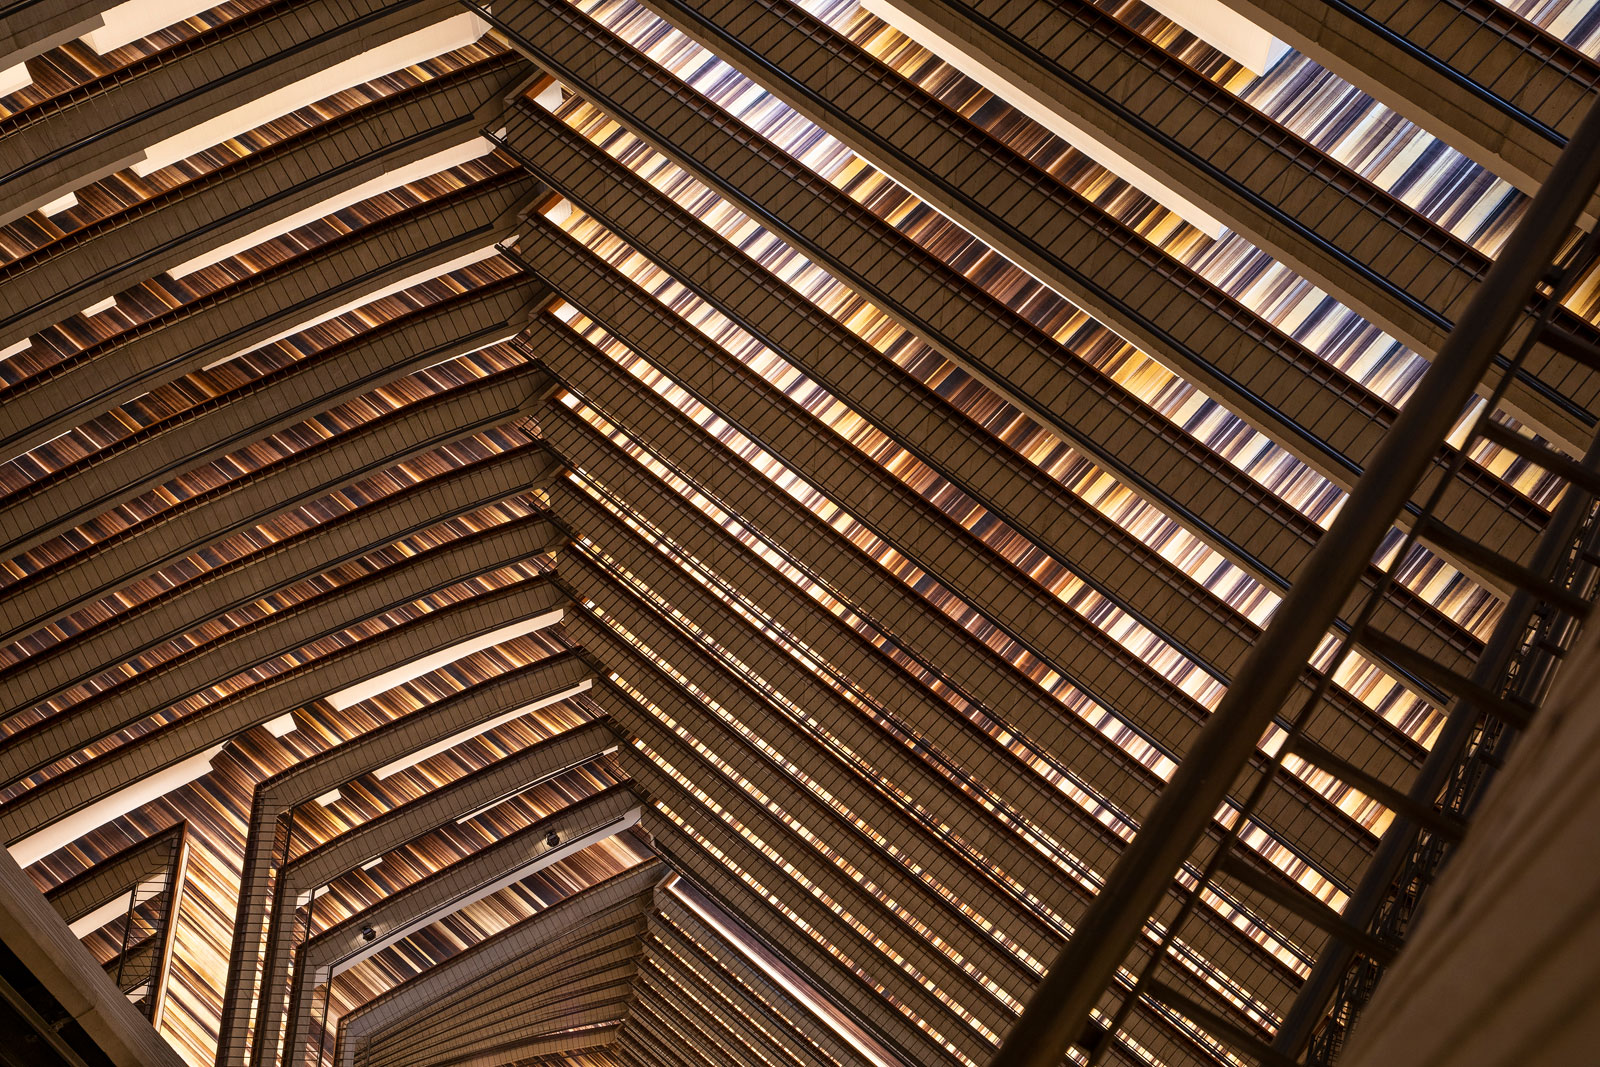 A photograph looking down into the atrium of the Marriott Marquis hotel in Atlanta.